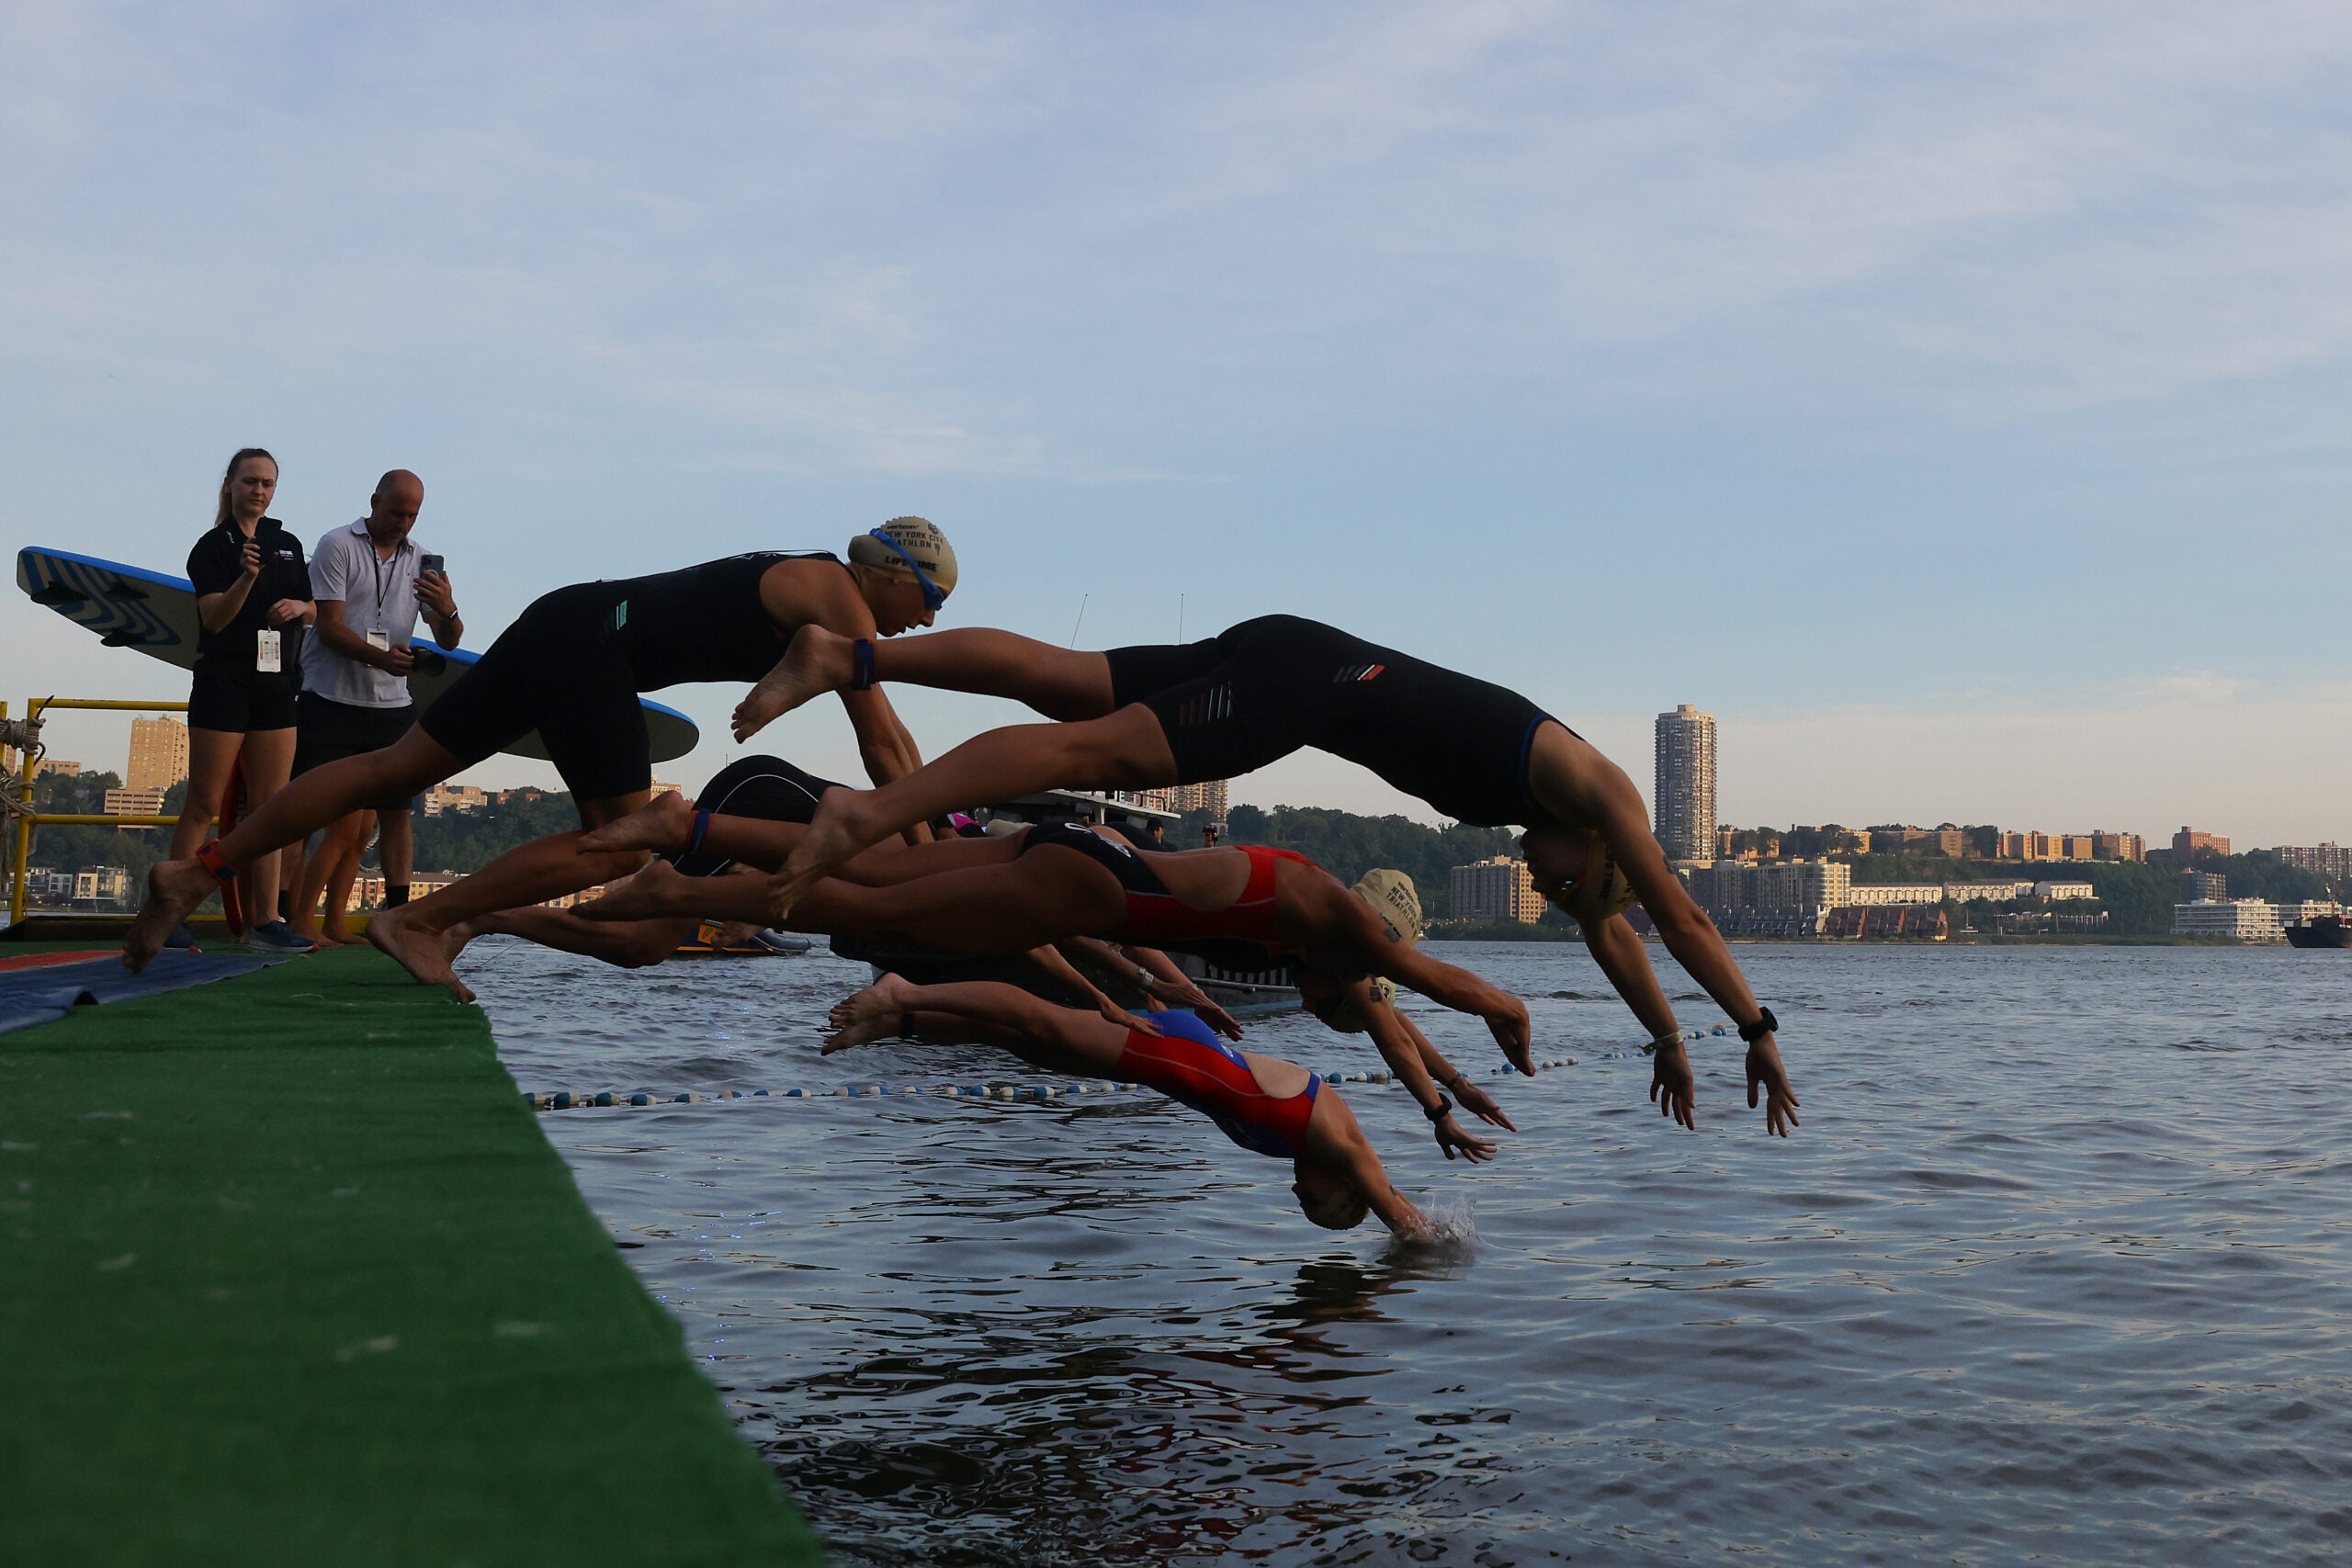 Athletes dive in to start their triathlon race after moving up from sprint to Olympic distance.